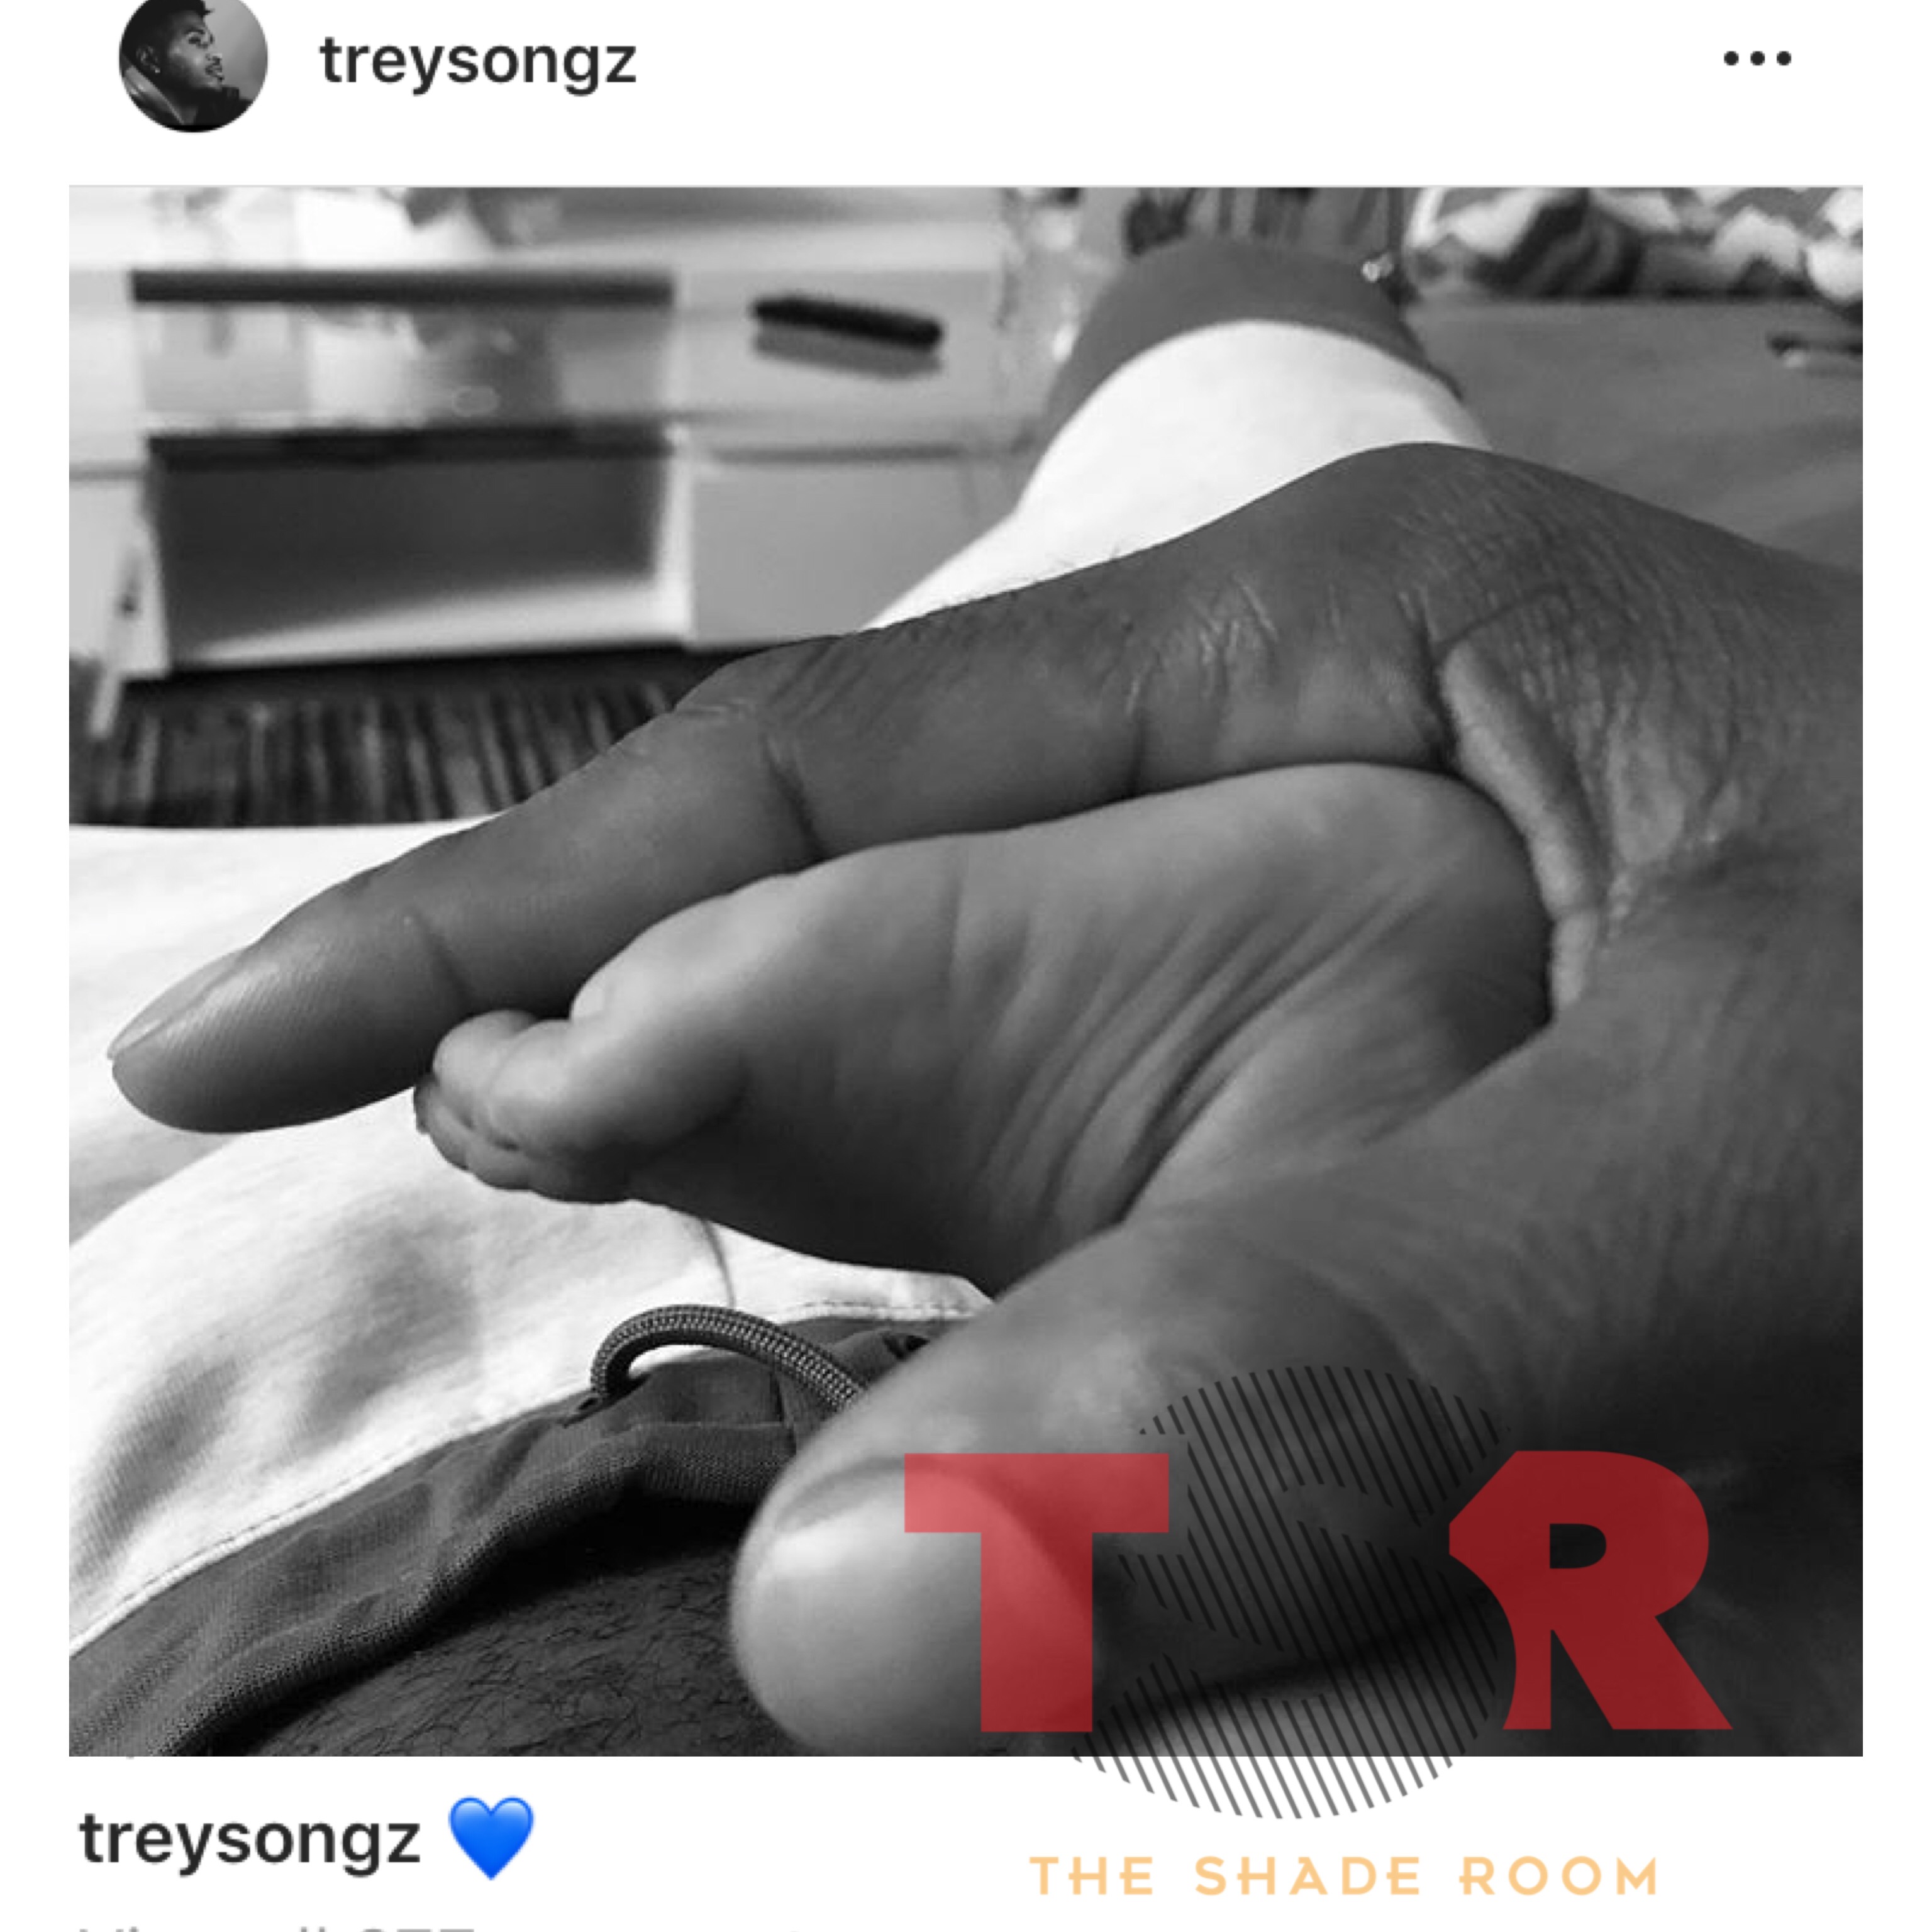 Fans trey songz Reactions to